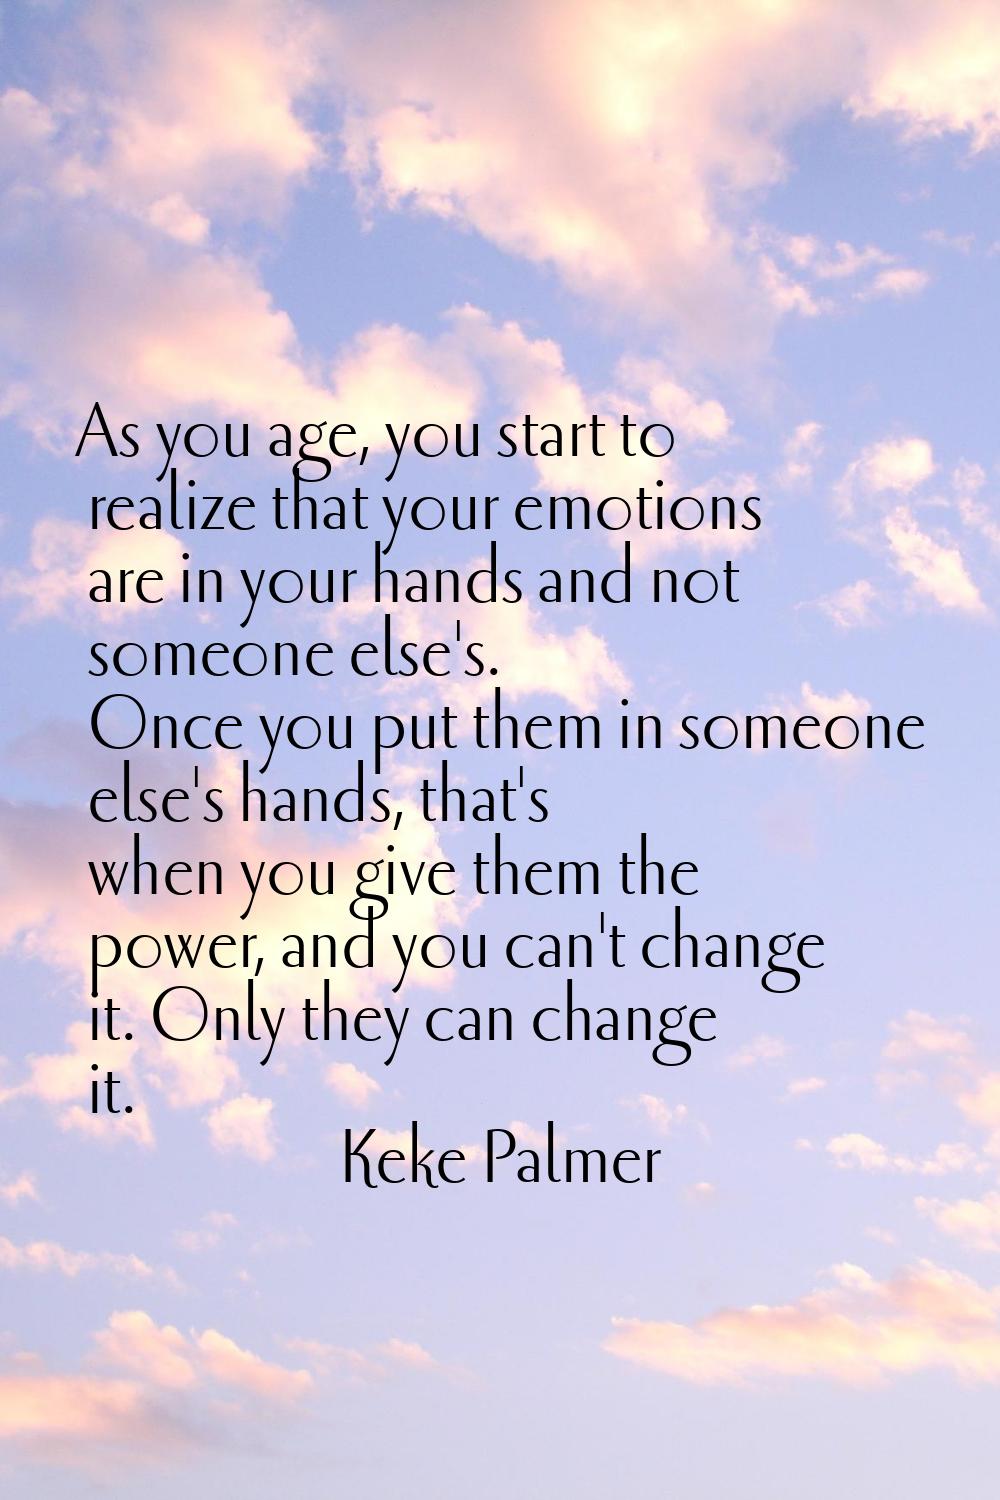 As you age, you start to realize that your emotions are in your hands and not someone else's. Once 